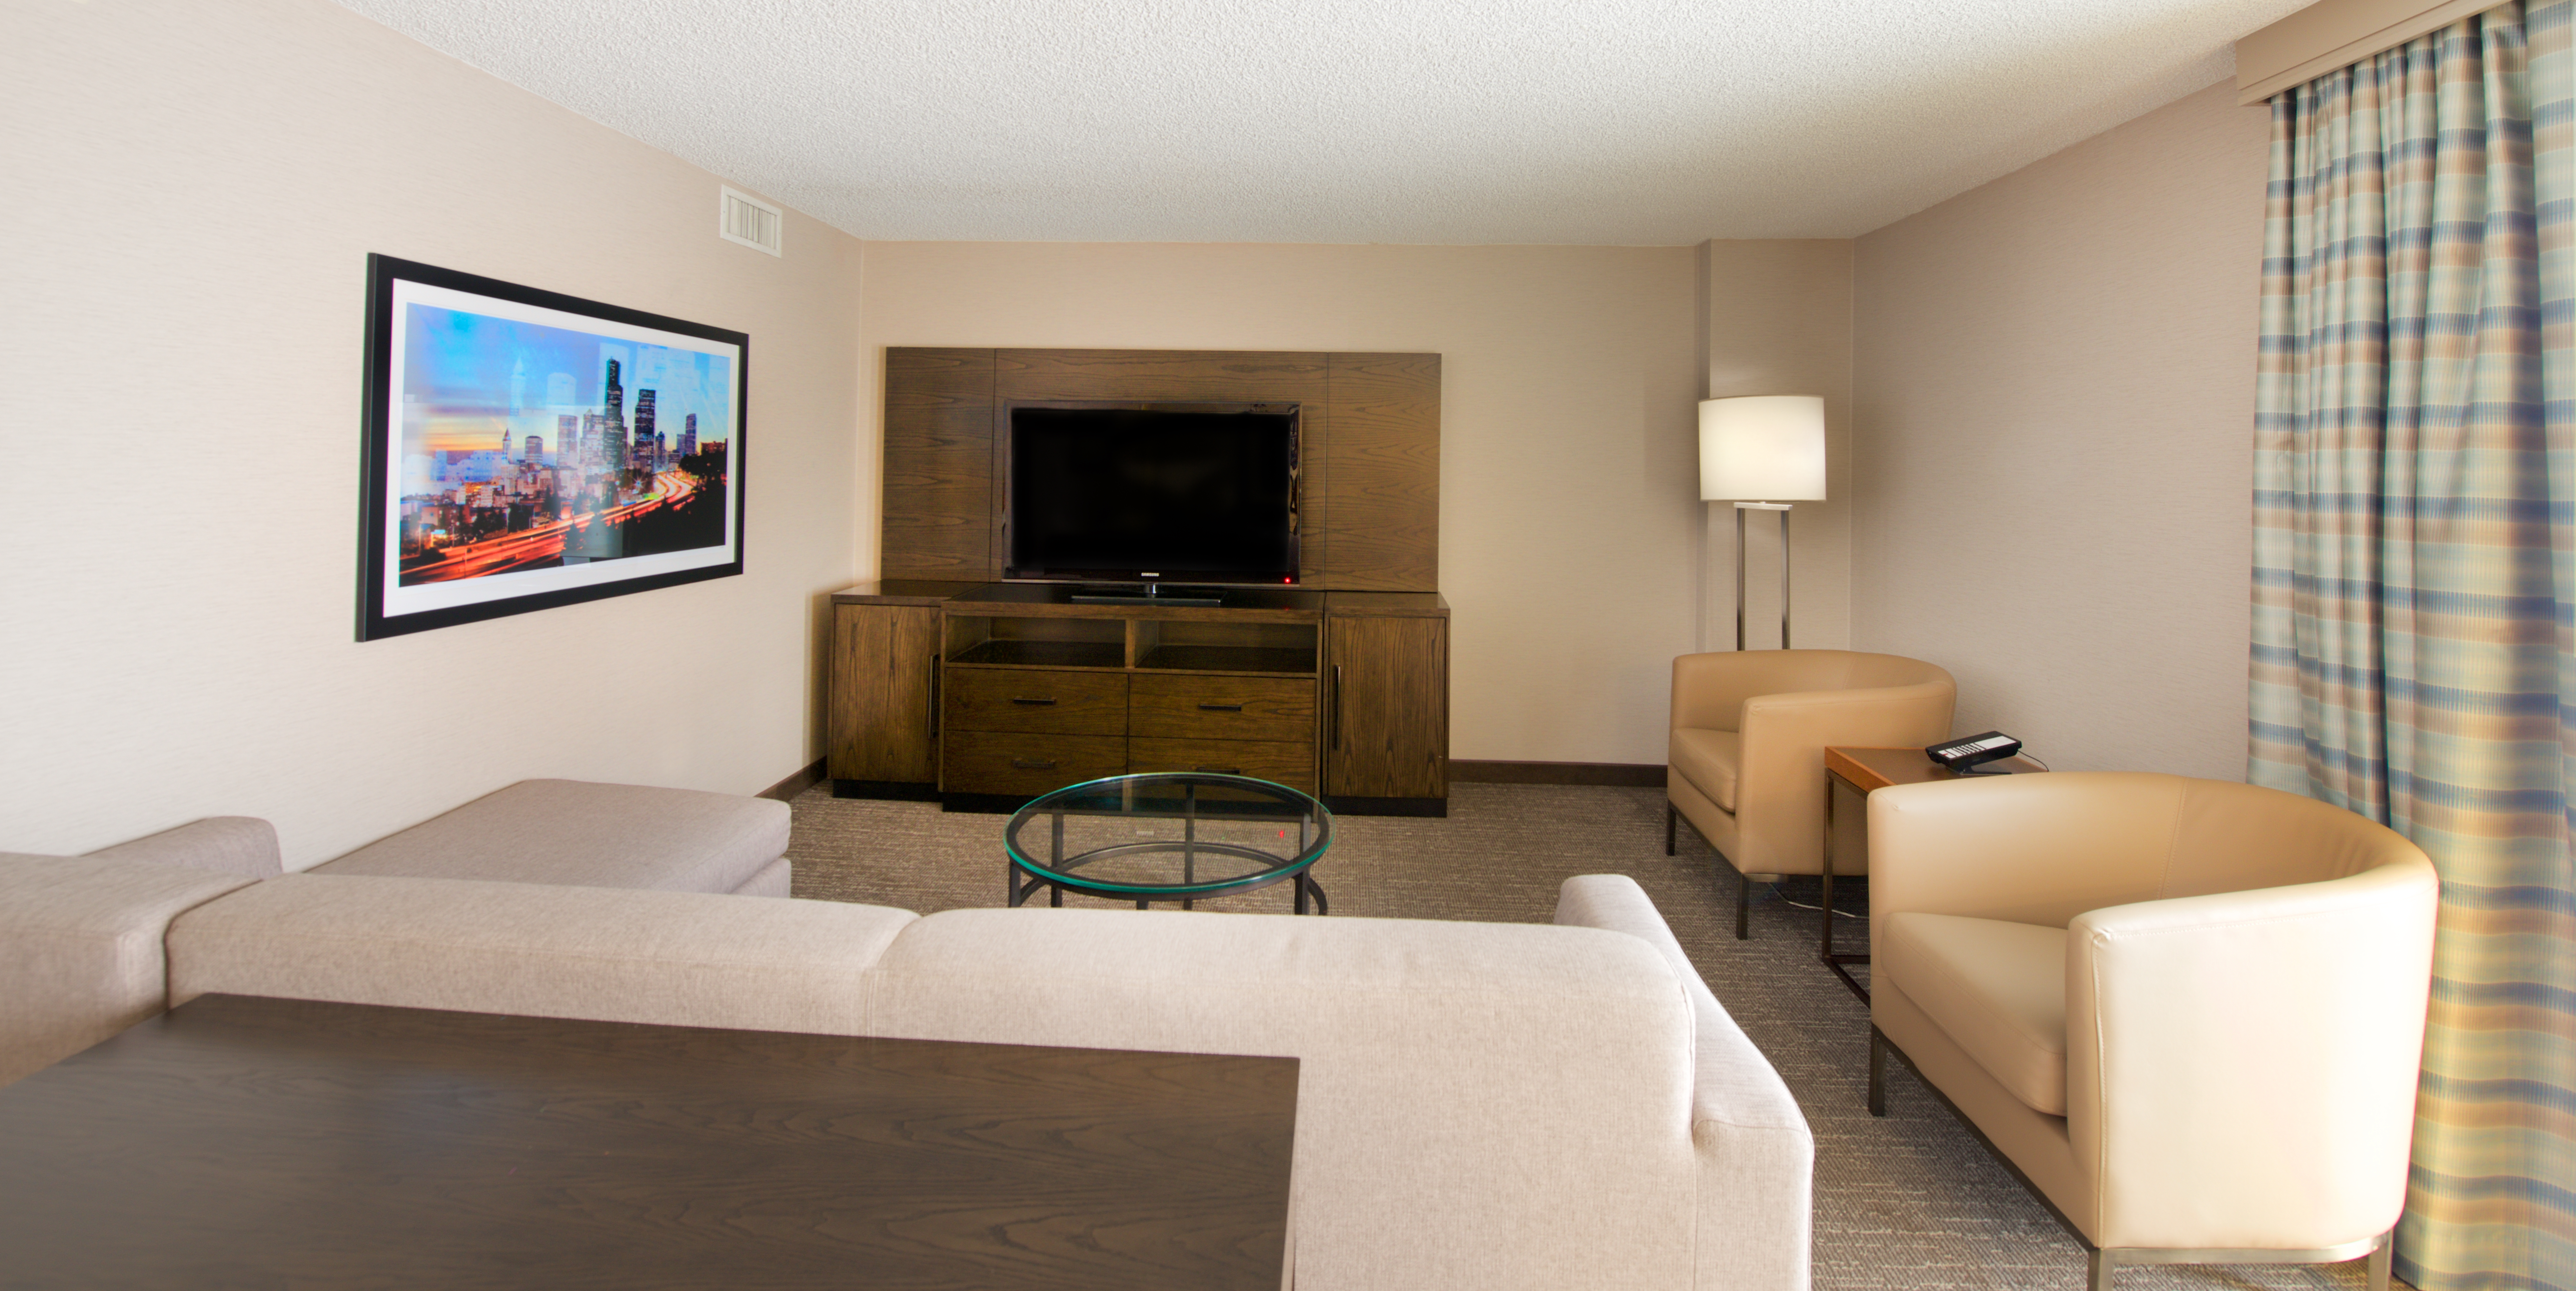 Presidential Suite Living area with Sofa and HDTV